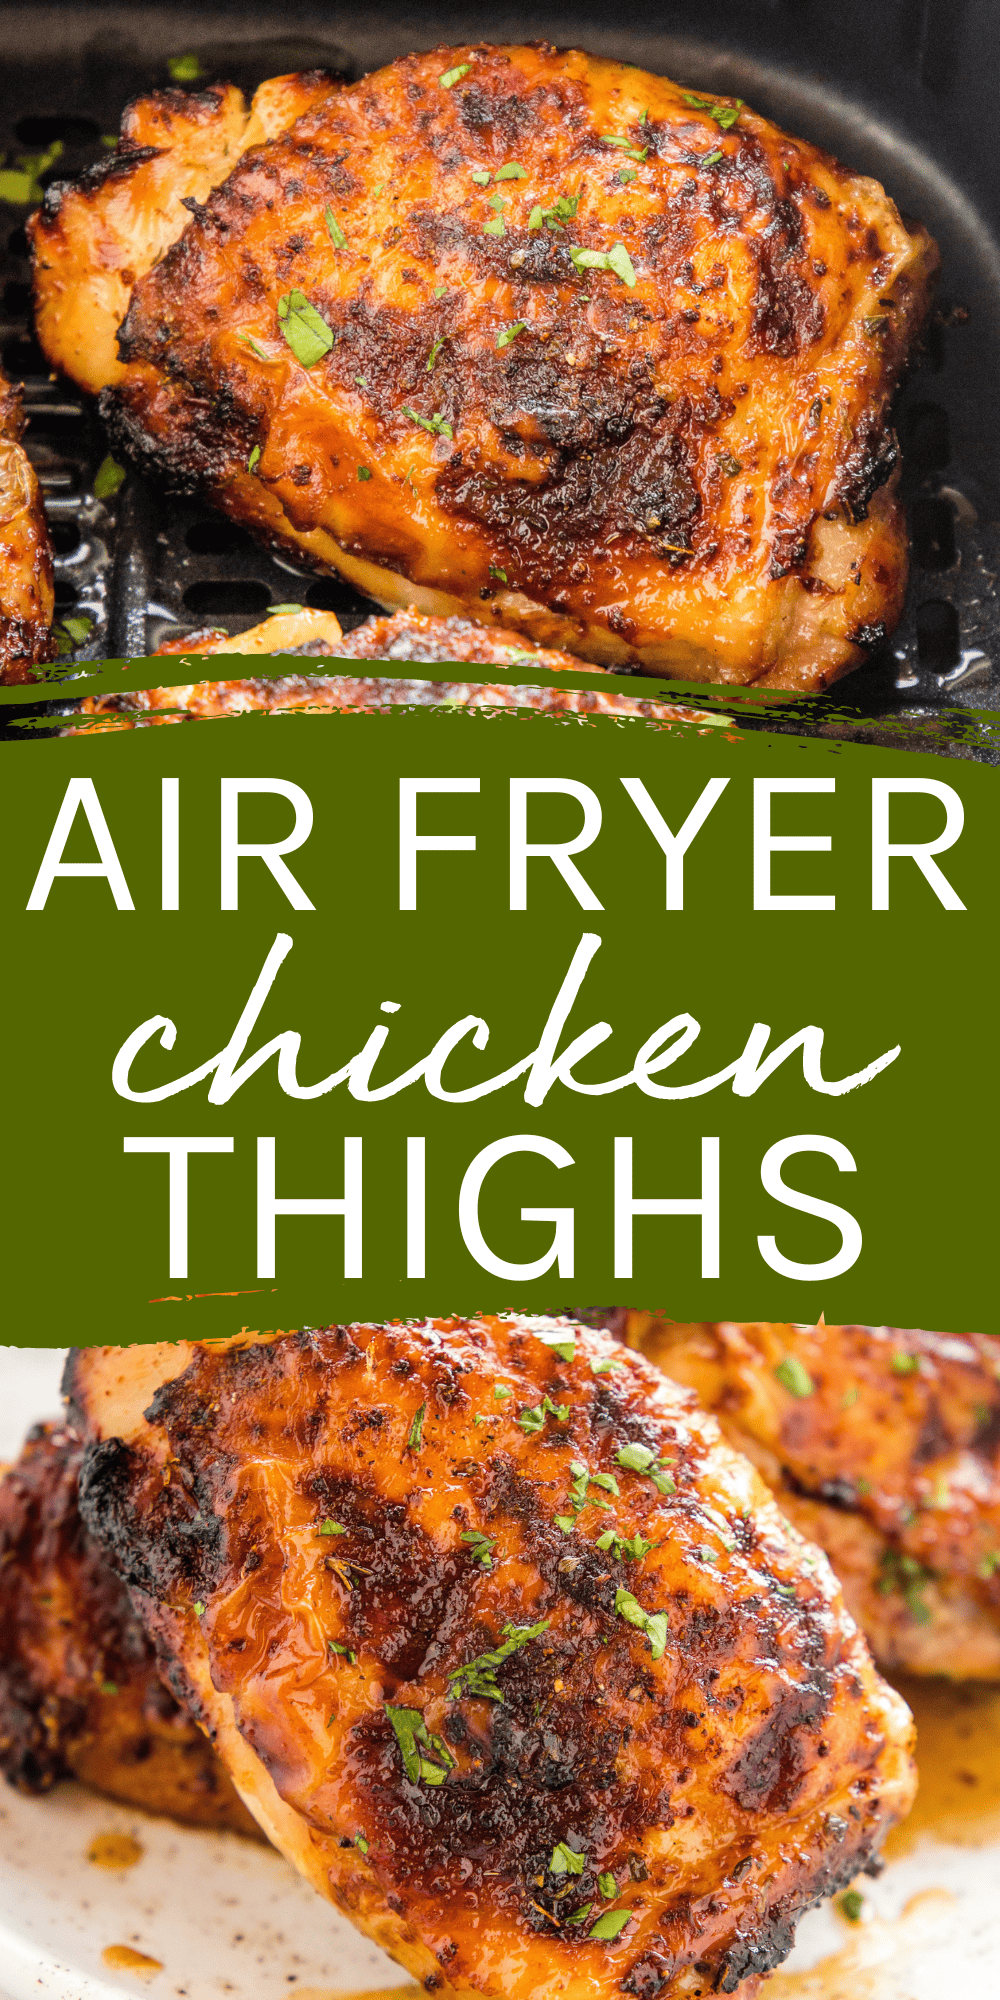 This Air Fryer Chicken Thighs recipe is an easy main dish ready in under 30 minutes! Use our comprehensive guide to chicken thighs made how you like them - with crispy skin, juicy boneless skinless chicken thighs, from fresh or frozen. Recipe from thebusybaker.ca! #airfryerchickenthighs #airfryerchicken #easychickenrecipe #chickenrecipe #maindish #easyrecipe #airfryerrecipe #airfryer #chickendinner #whatsfordinner #mealplan via @busybakerblog